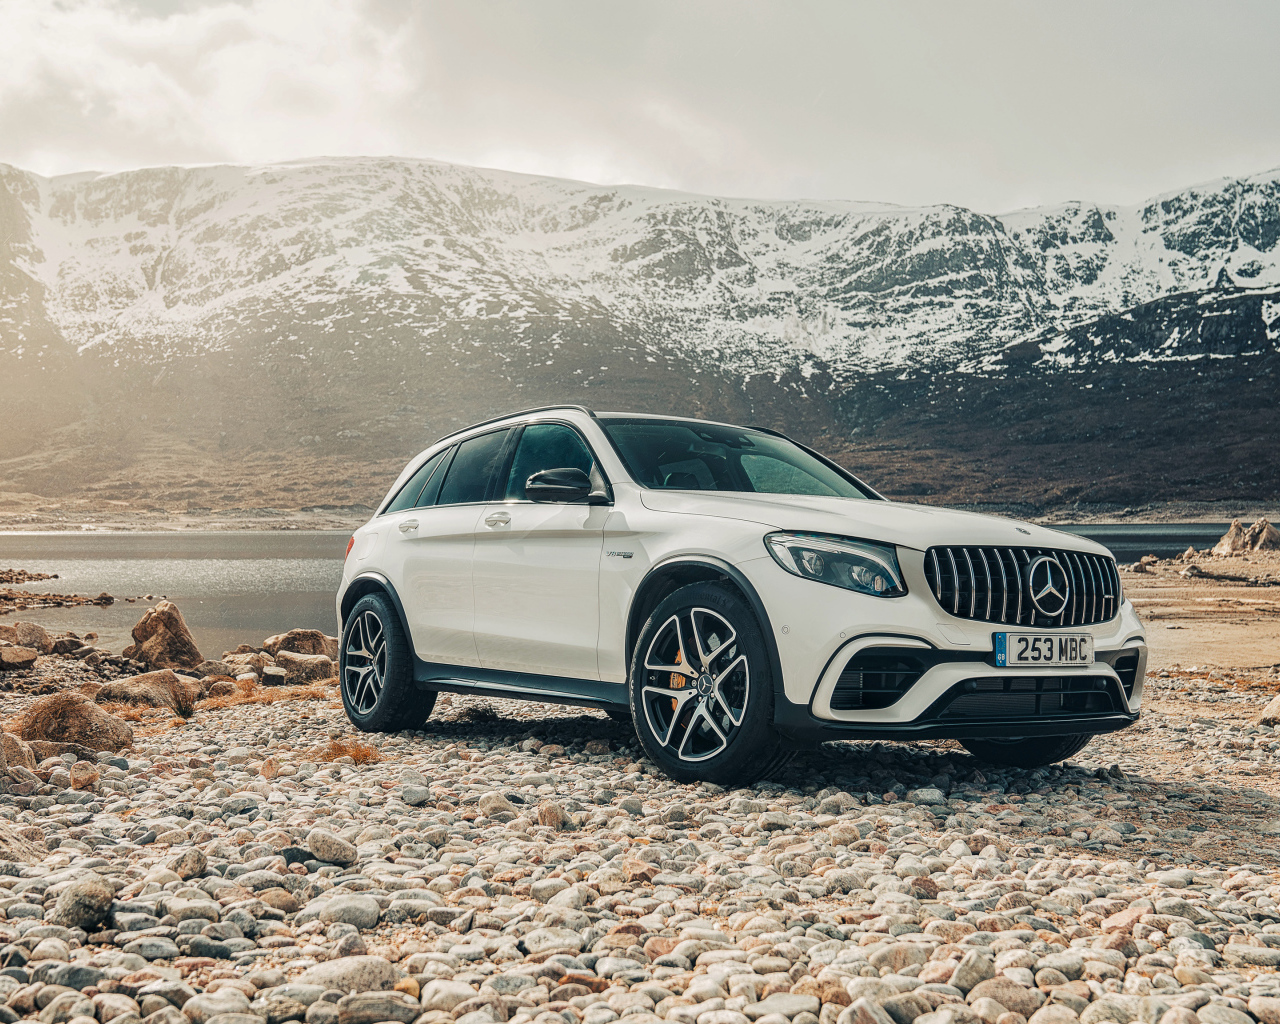 White SUV Mercedes AMG GLC 63 S, 2018 against the backdrop of the mountains